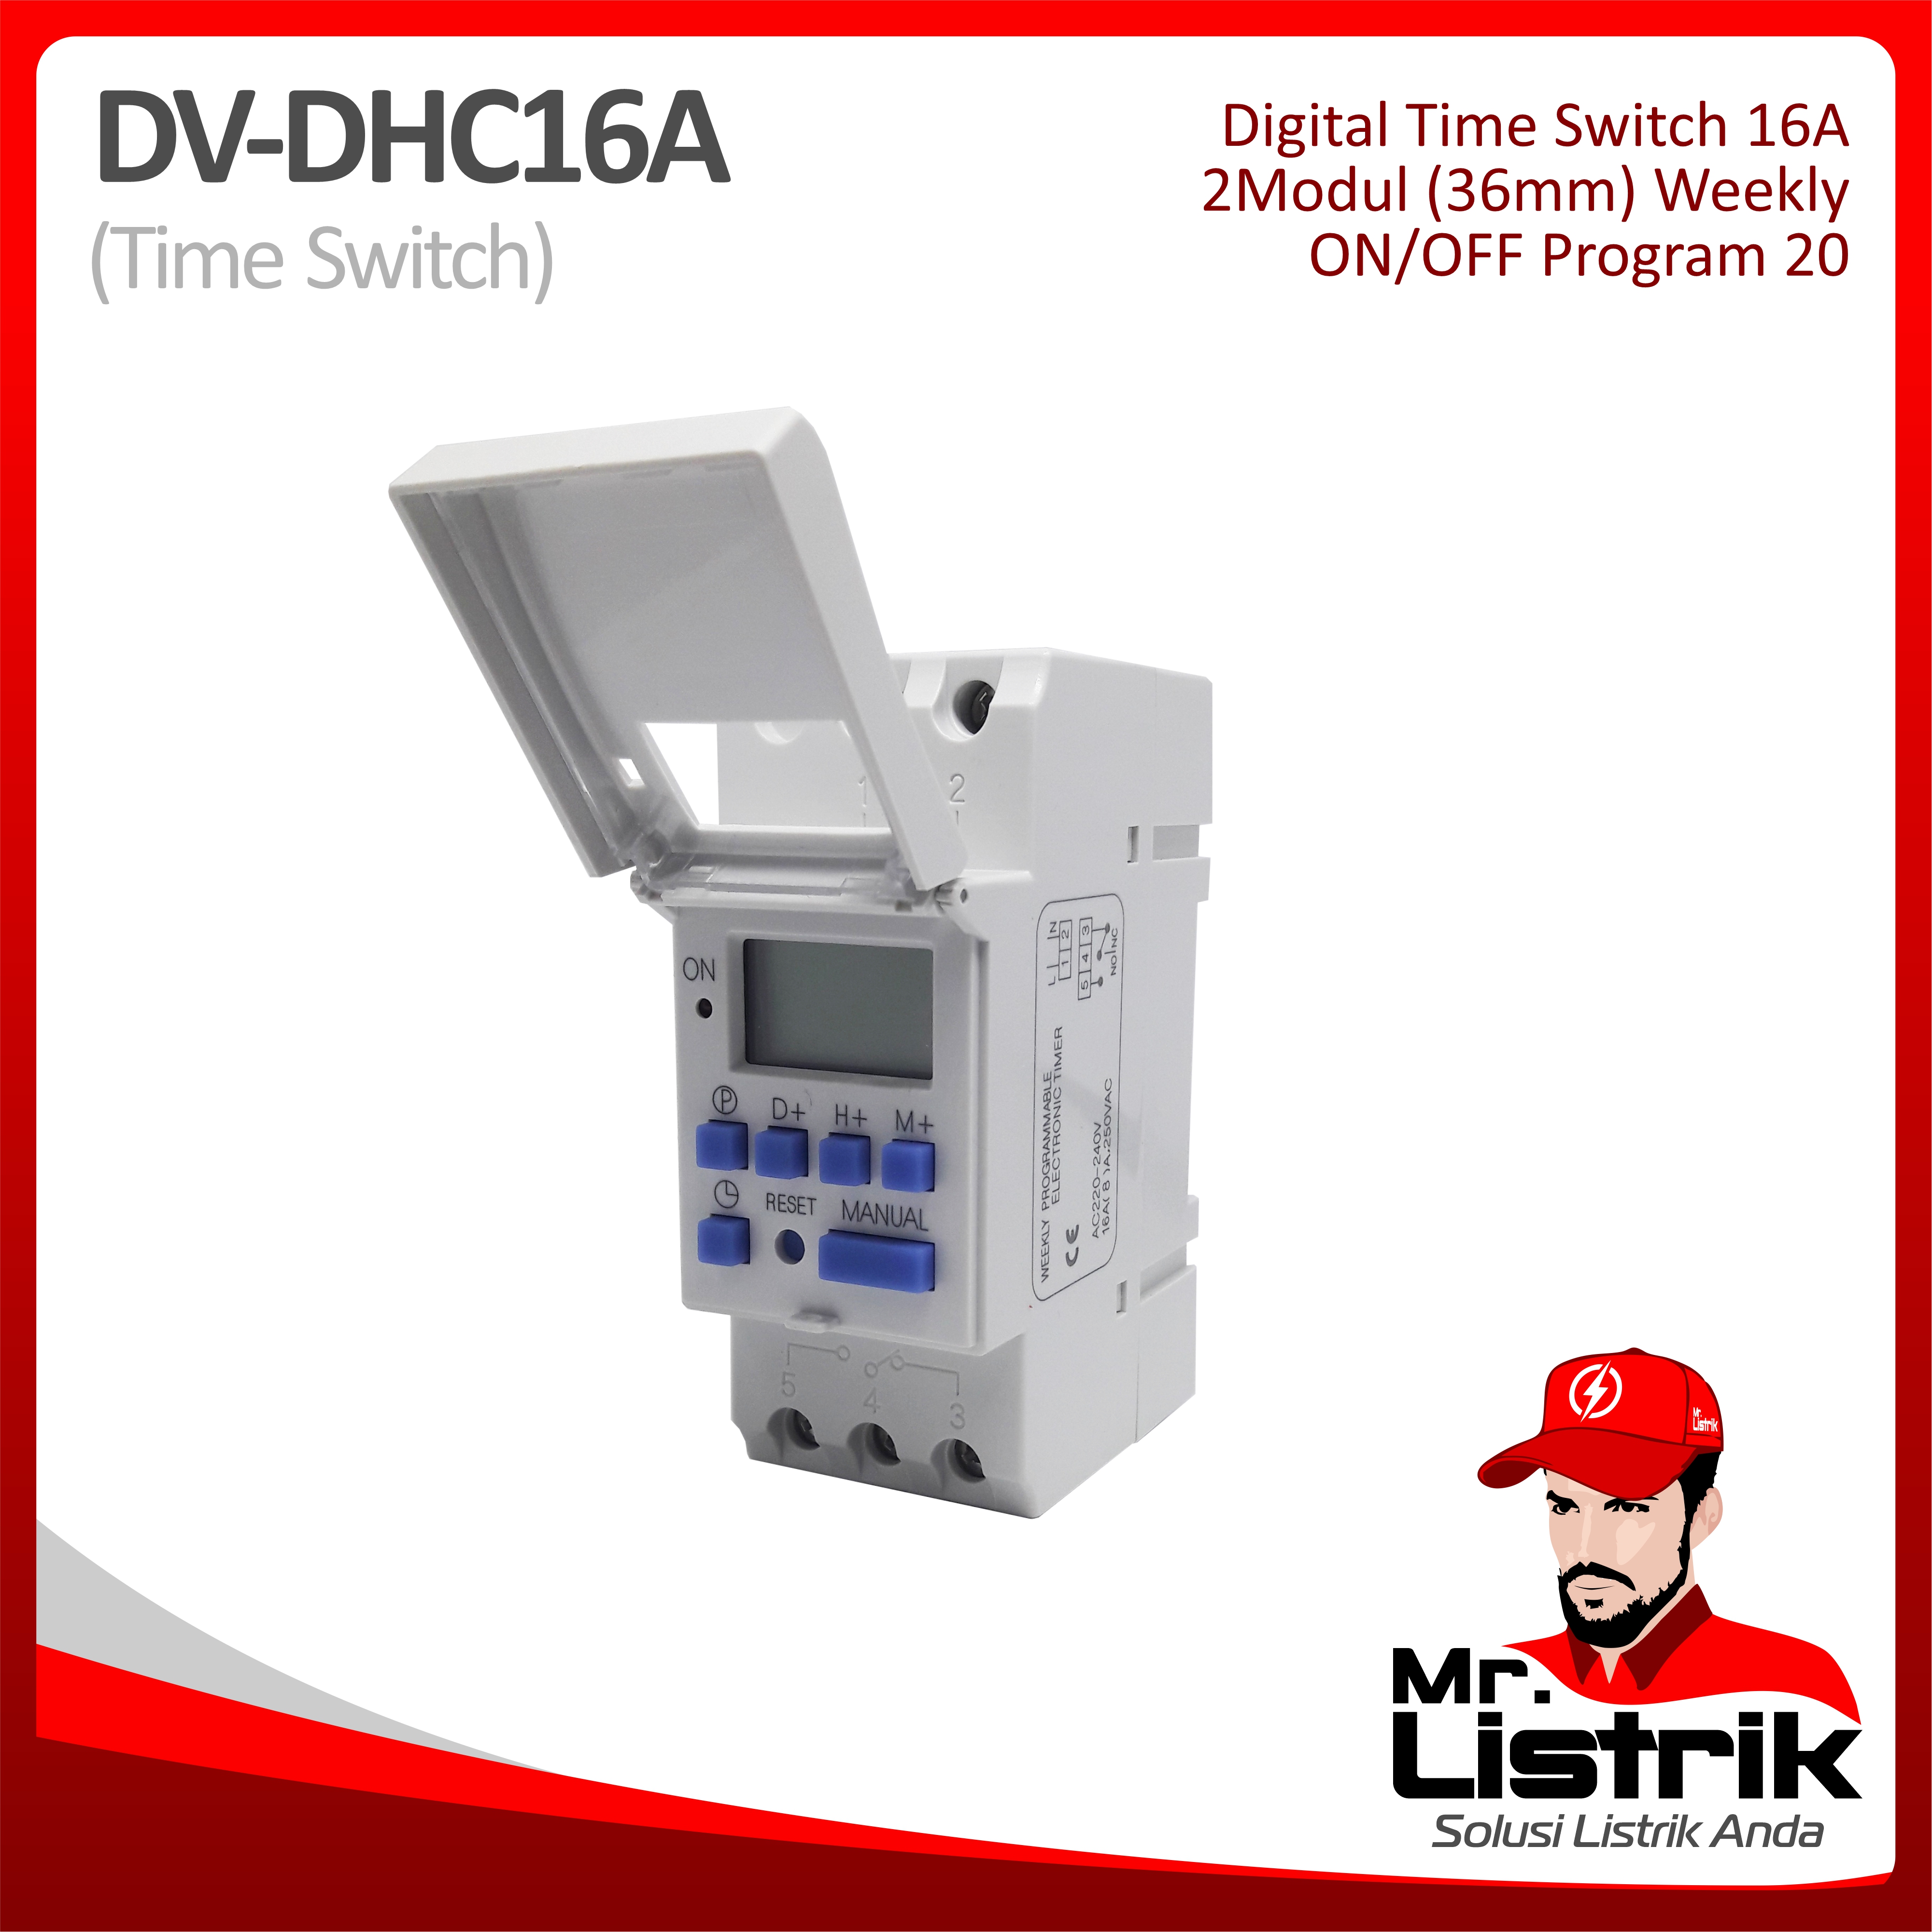 Digital Time Switch IP20 Weekly DV DHC16A